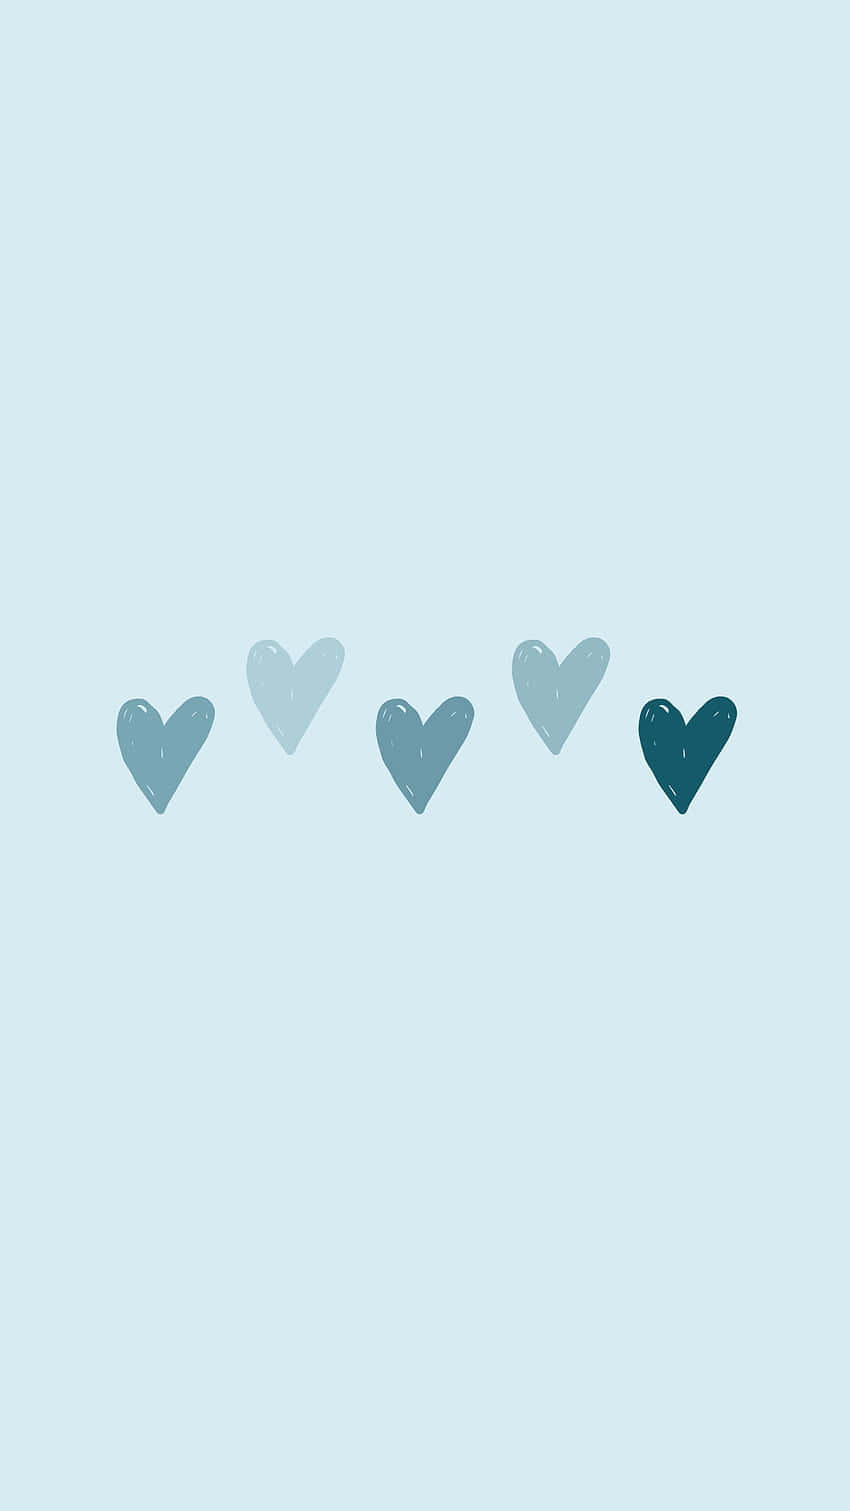 A charming and vibrant pastel blue solid Wallpaper